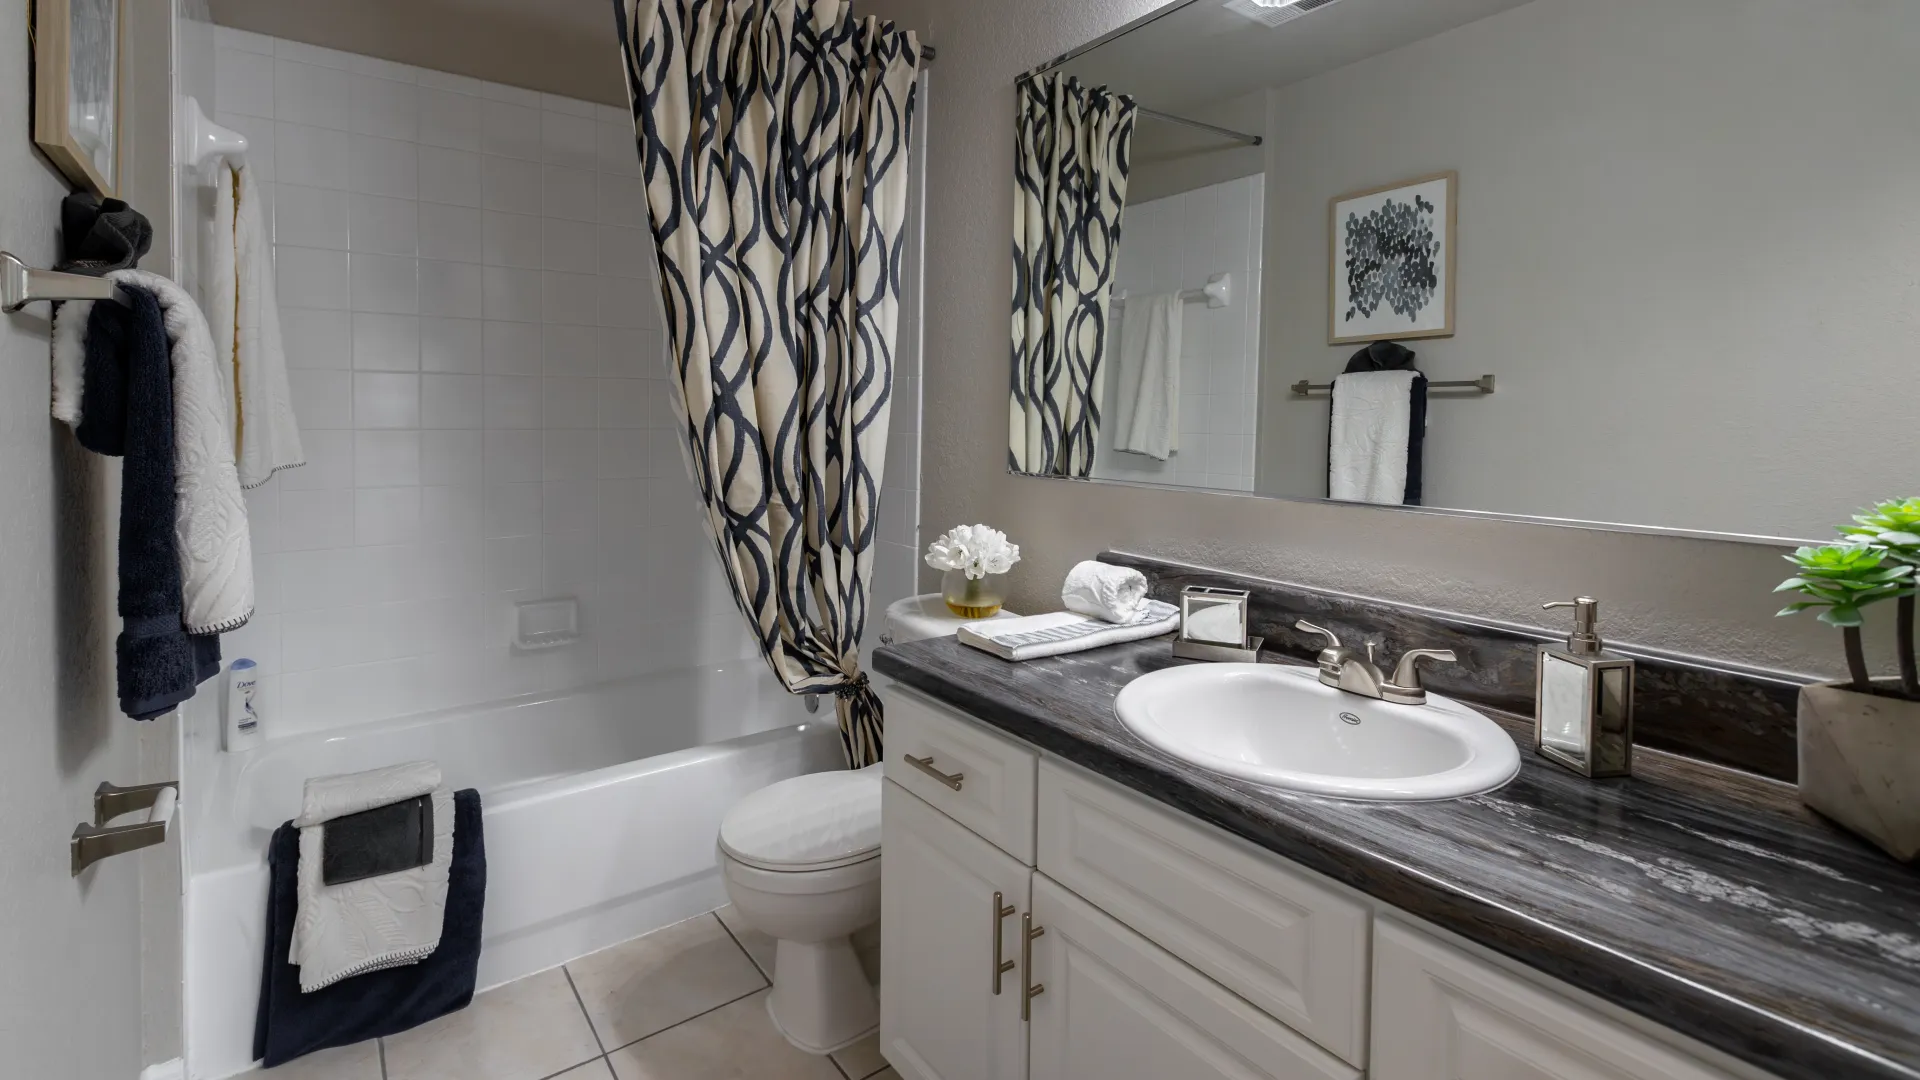 A sleek, modern bathroom adorned with spacious white cabinetry, an extended vanity, and a refined white-tiled shower, creating a polished ambiance.